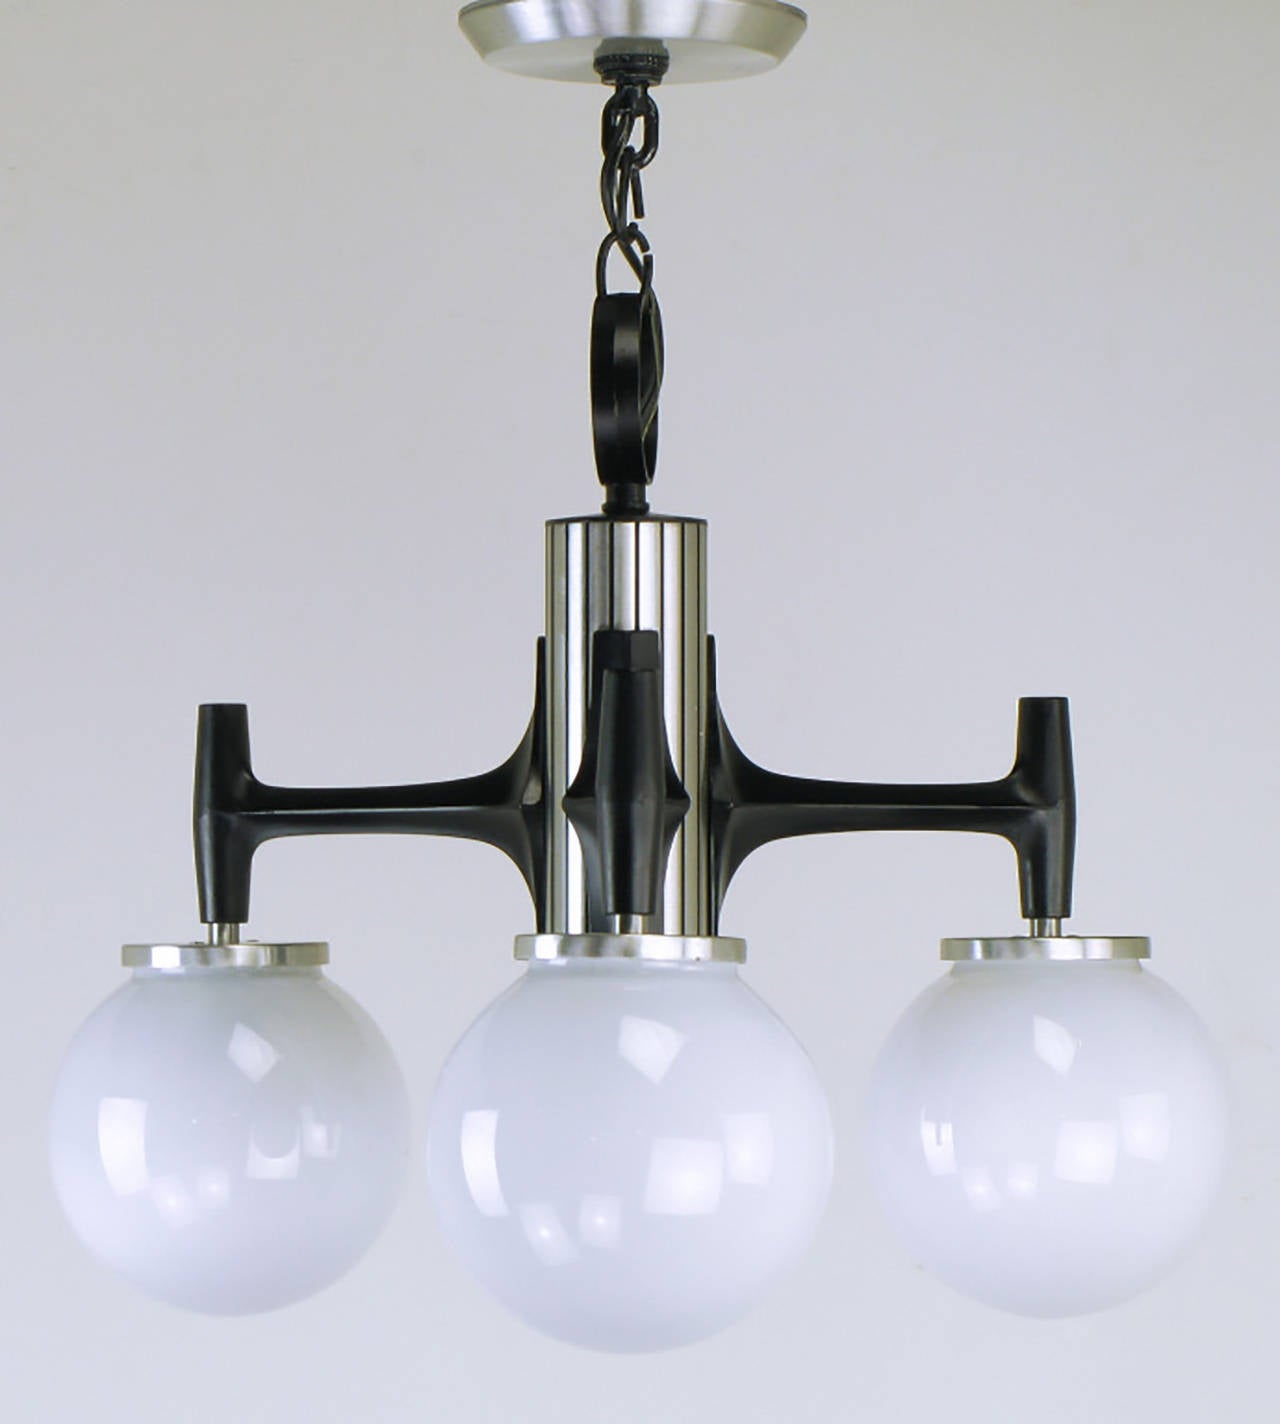 Litecraft of California milk glass triple globe hanging light fixture. Constructed of cast and brushed aluminum. Cast and black enameled aluminum arms with brushed aluminum fitters. Center cylinder is brushed aluminum with incised and black enameled